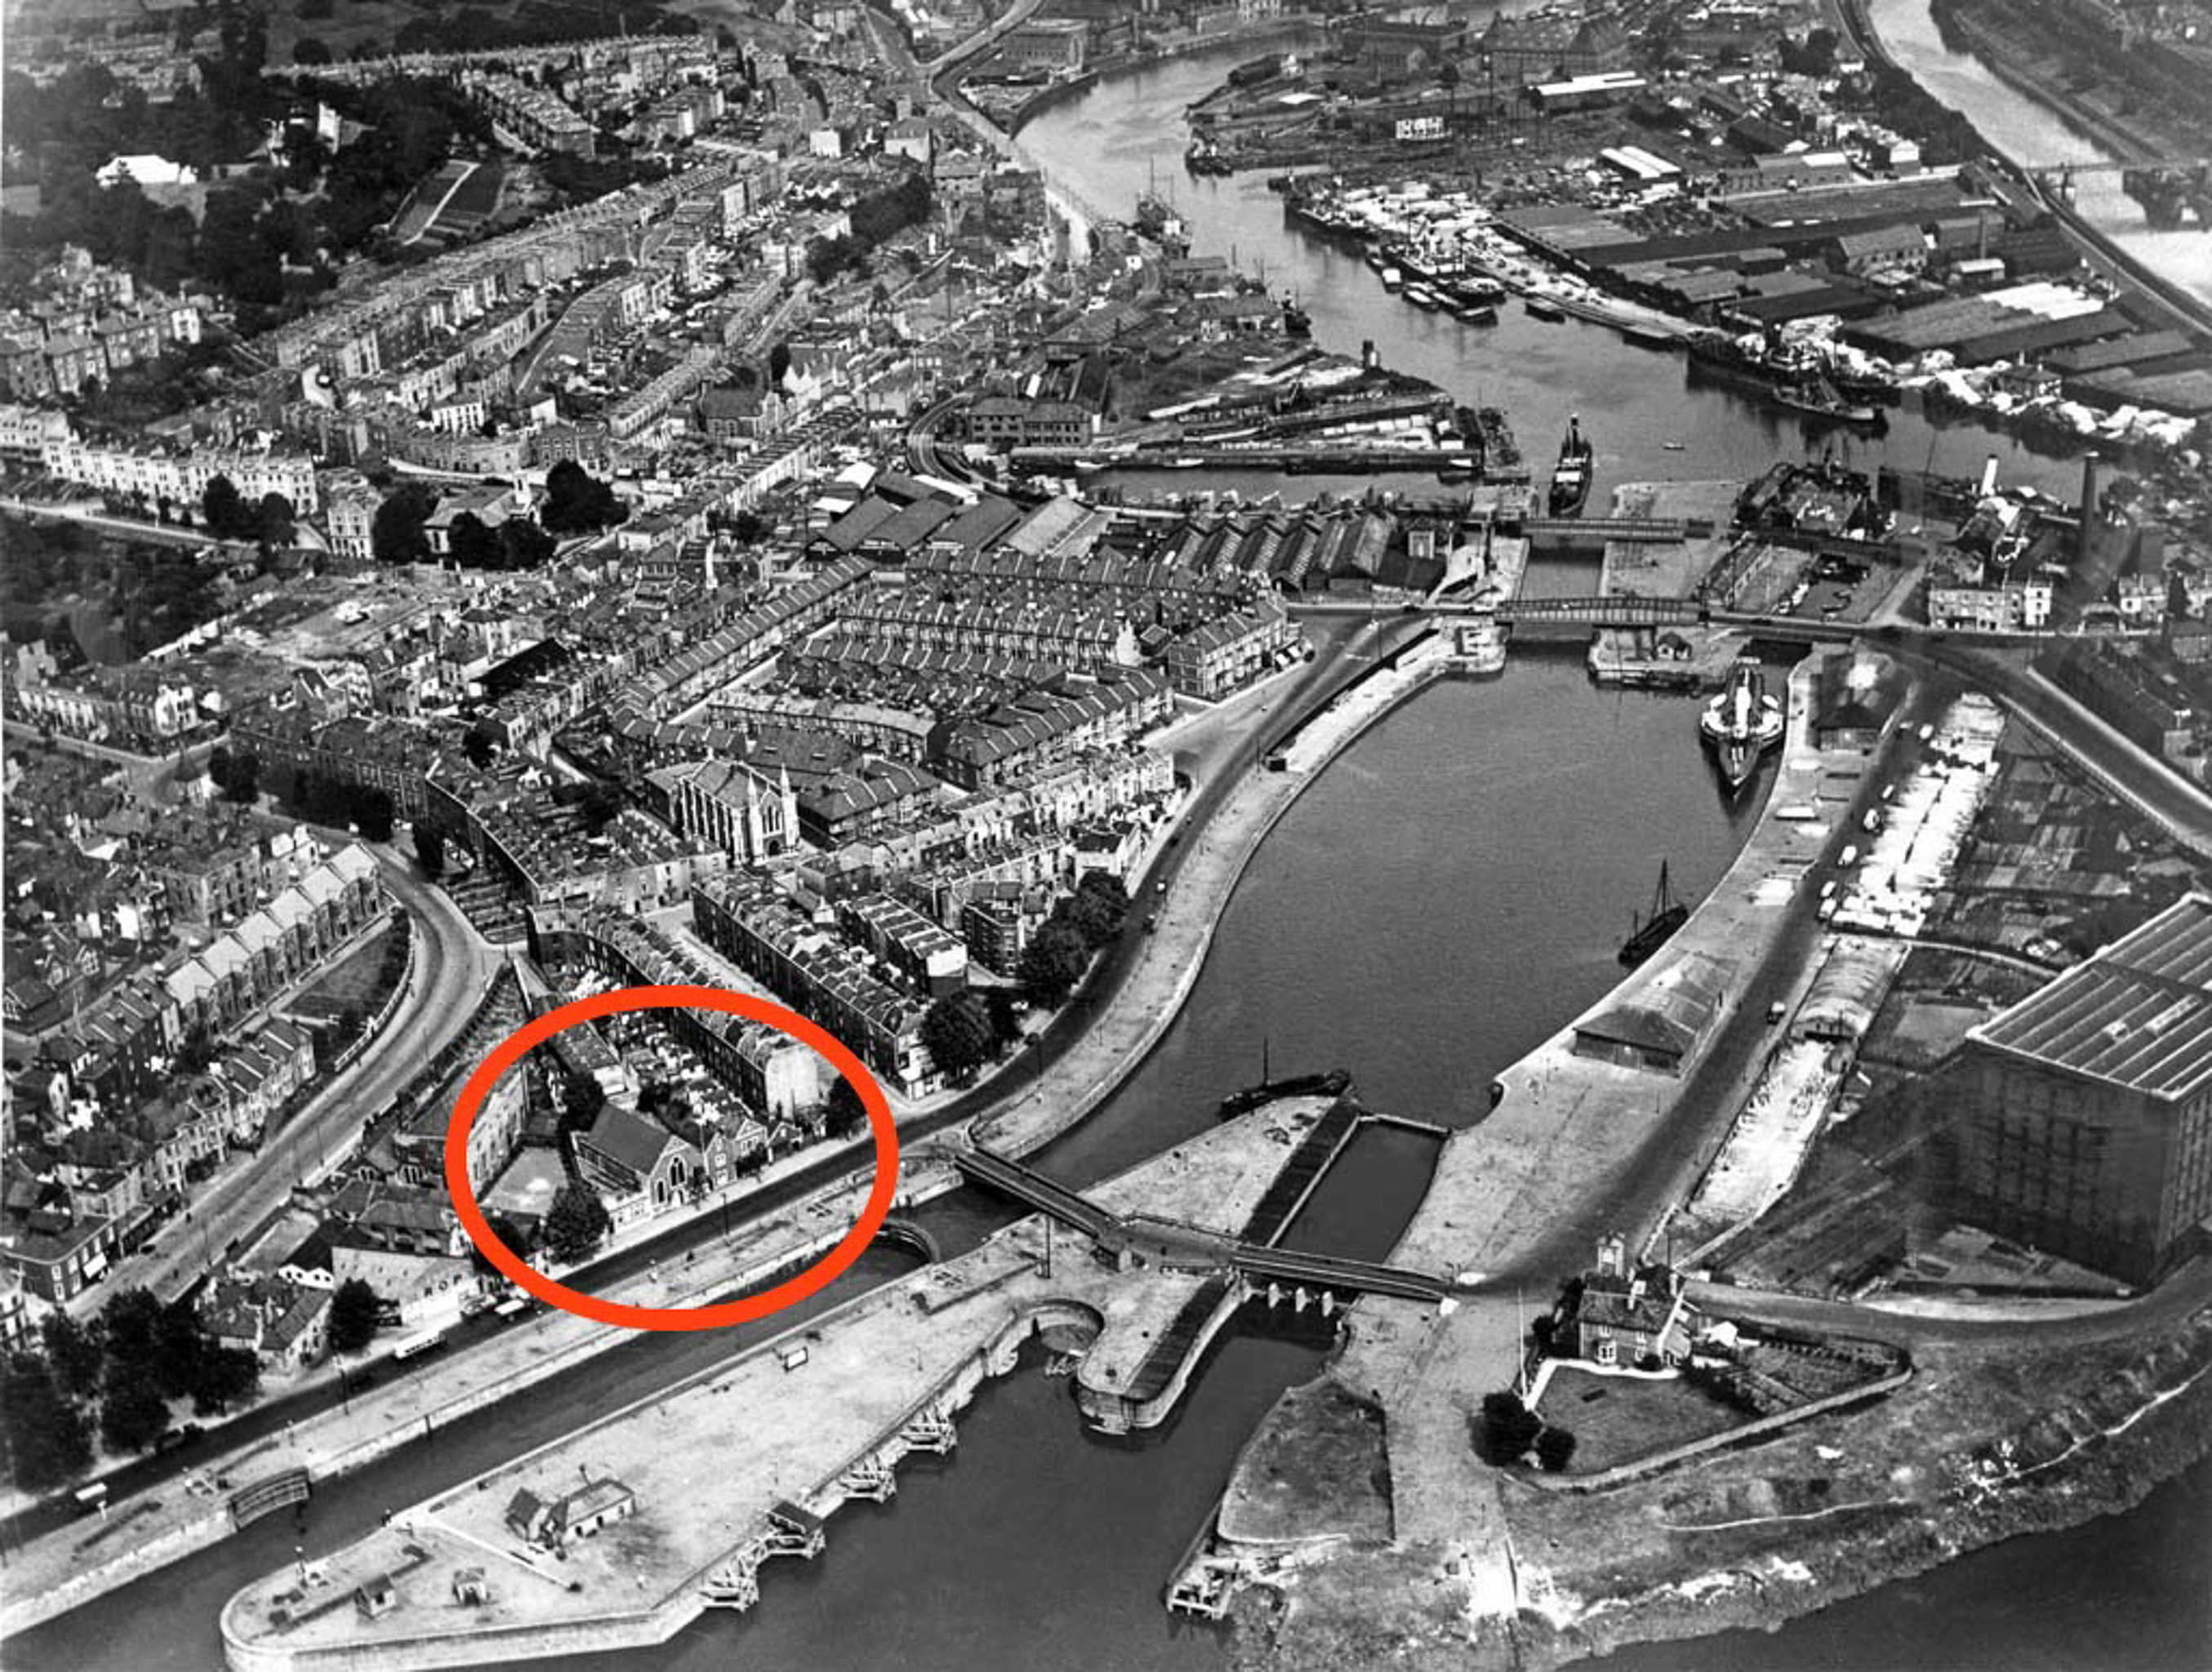 PBA487 Aerial View Terrett Memorial Hall Circled
I was fairly sure the Terrett Memorial Hall would have faced Entrance Lock—after all, they'd be wanting to drum up trade from sailors!—and I eventu...